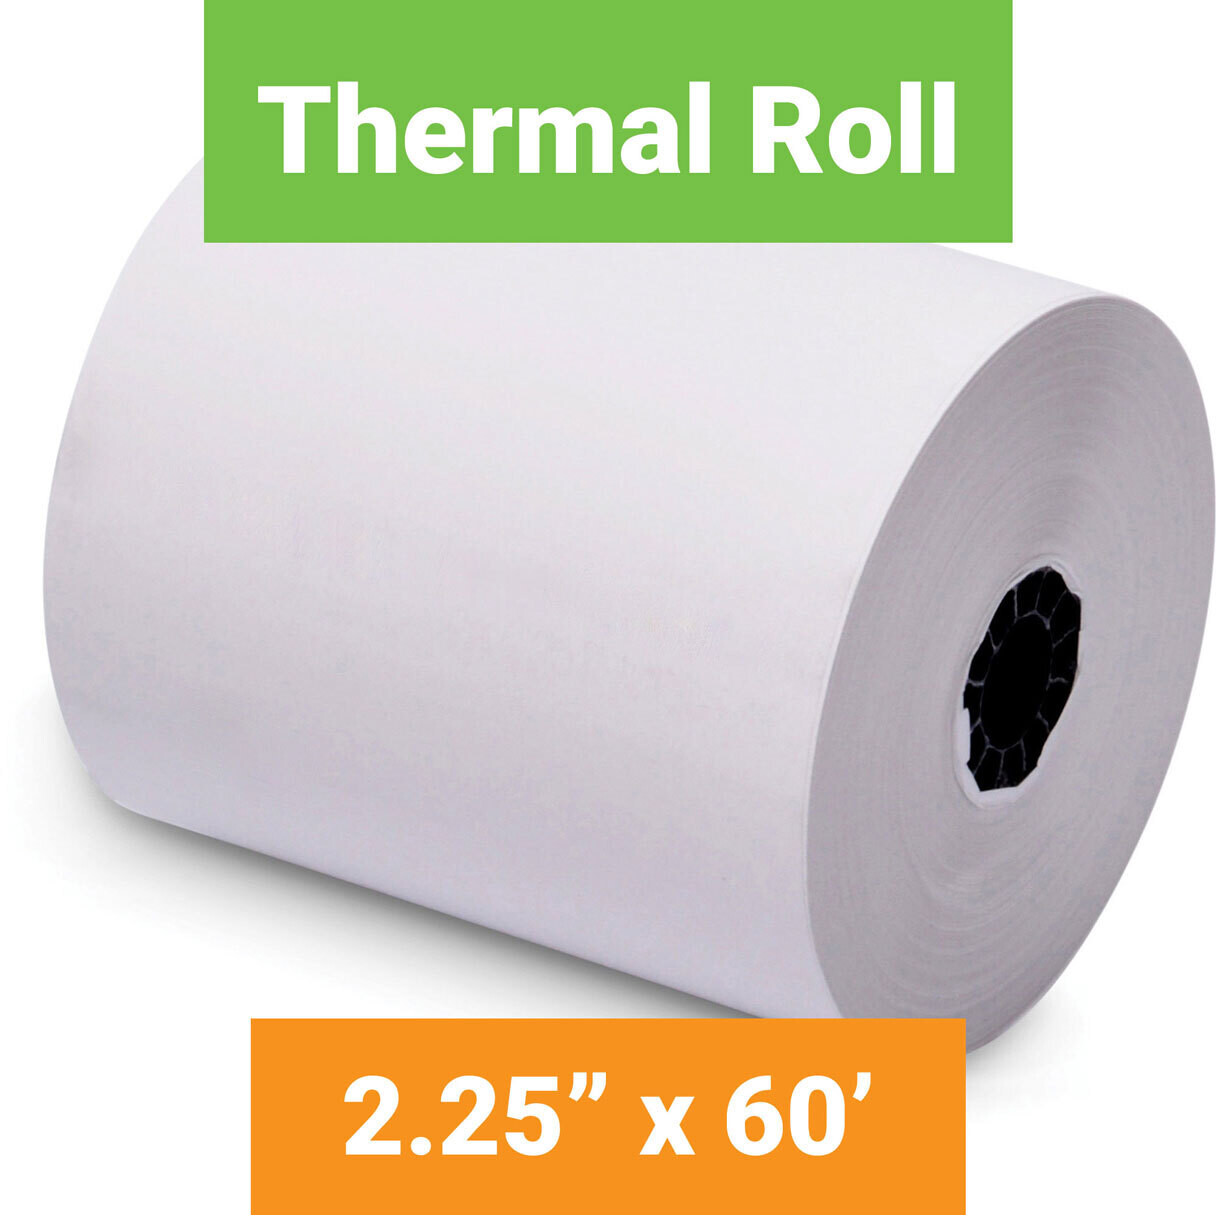 Paper, Thermal Roll, BPA-Free 2.25" x 60', Case of 50, White